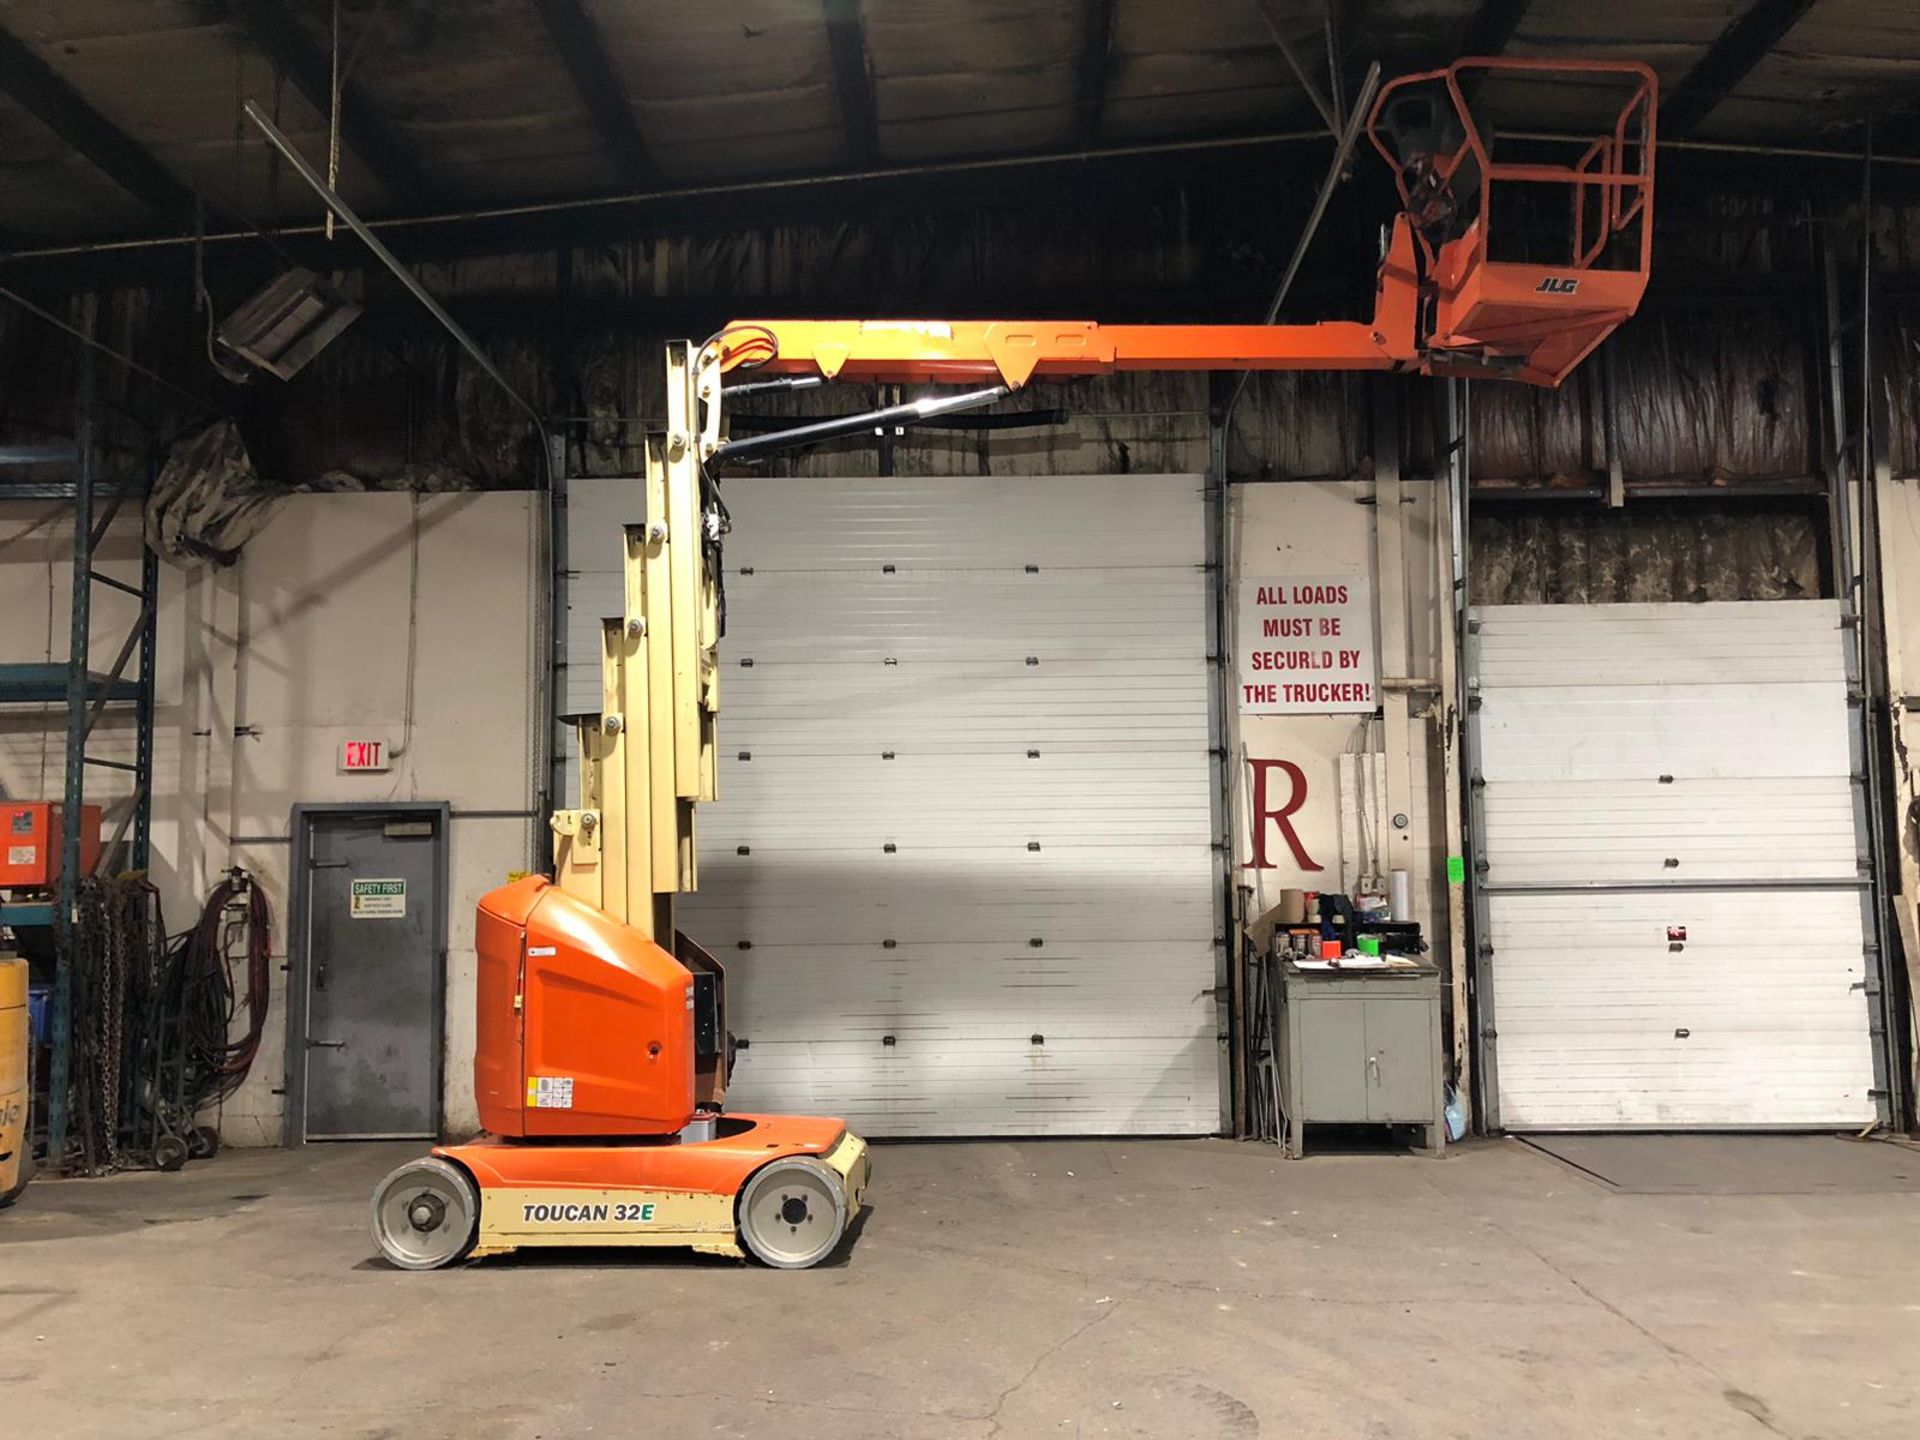 2014 JLG 32E Toucan Mast Boom Lift - Electric 48V with Low Hours with 32' Platform Height and 500lbs - Image 4 of 7